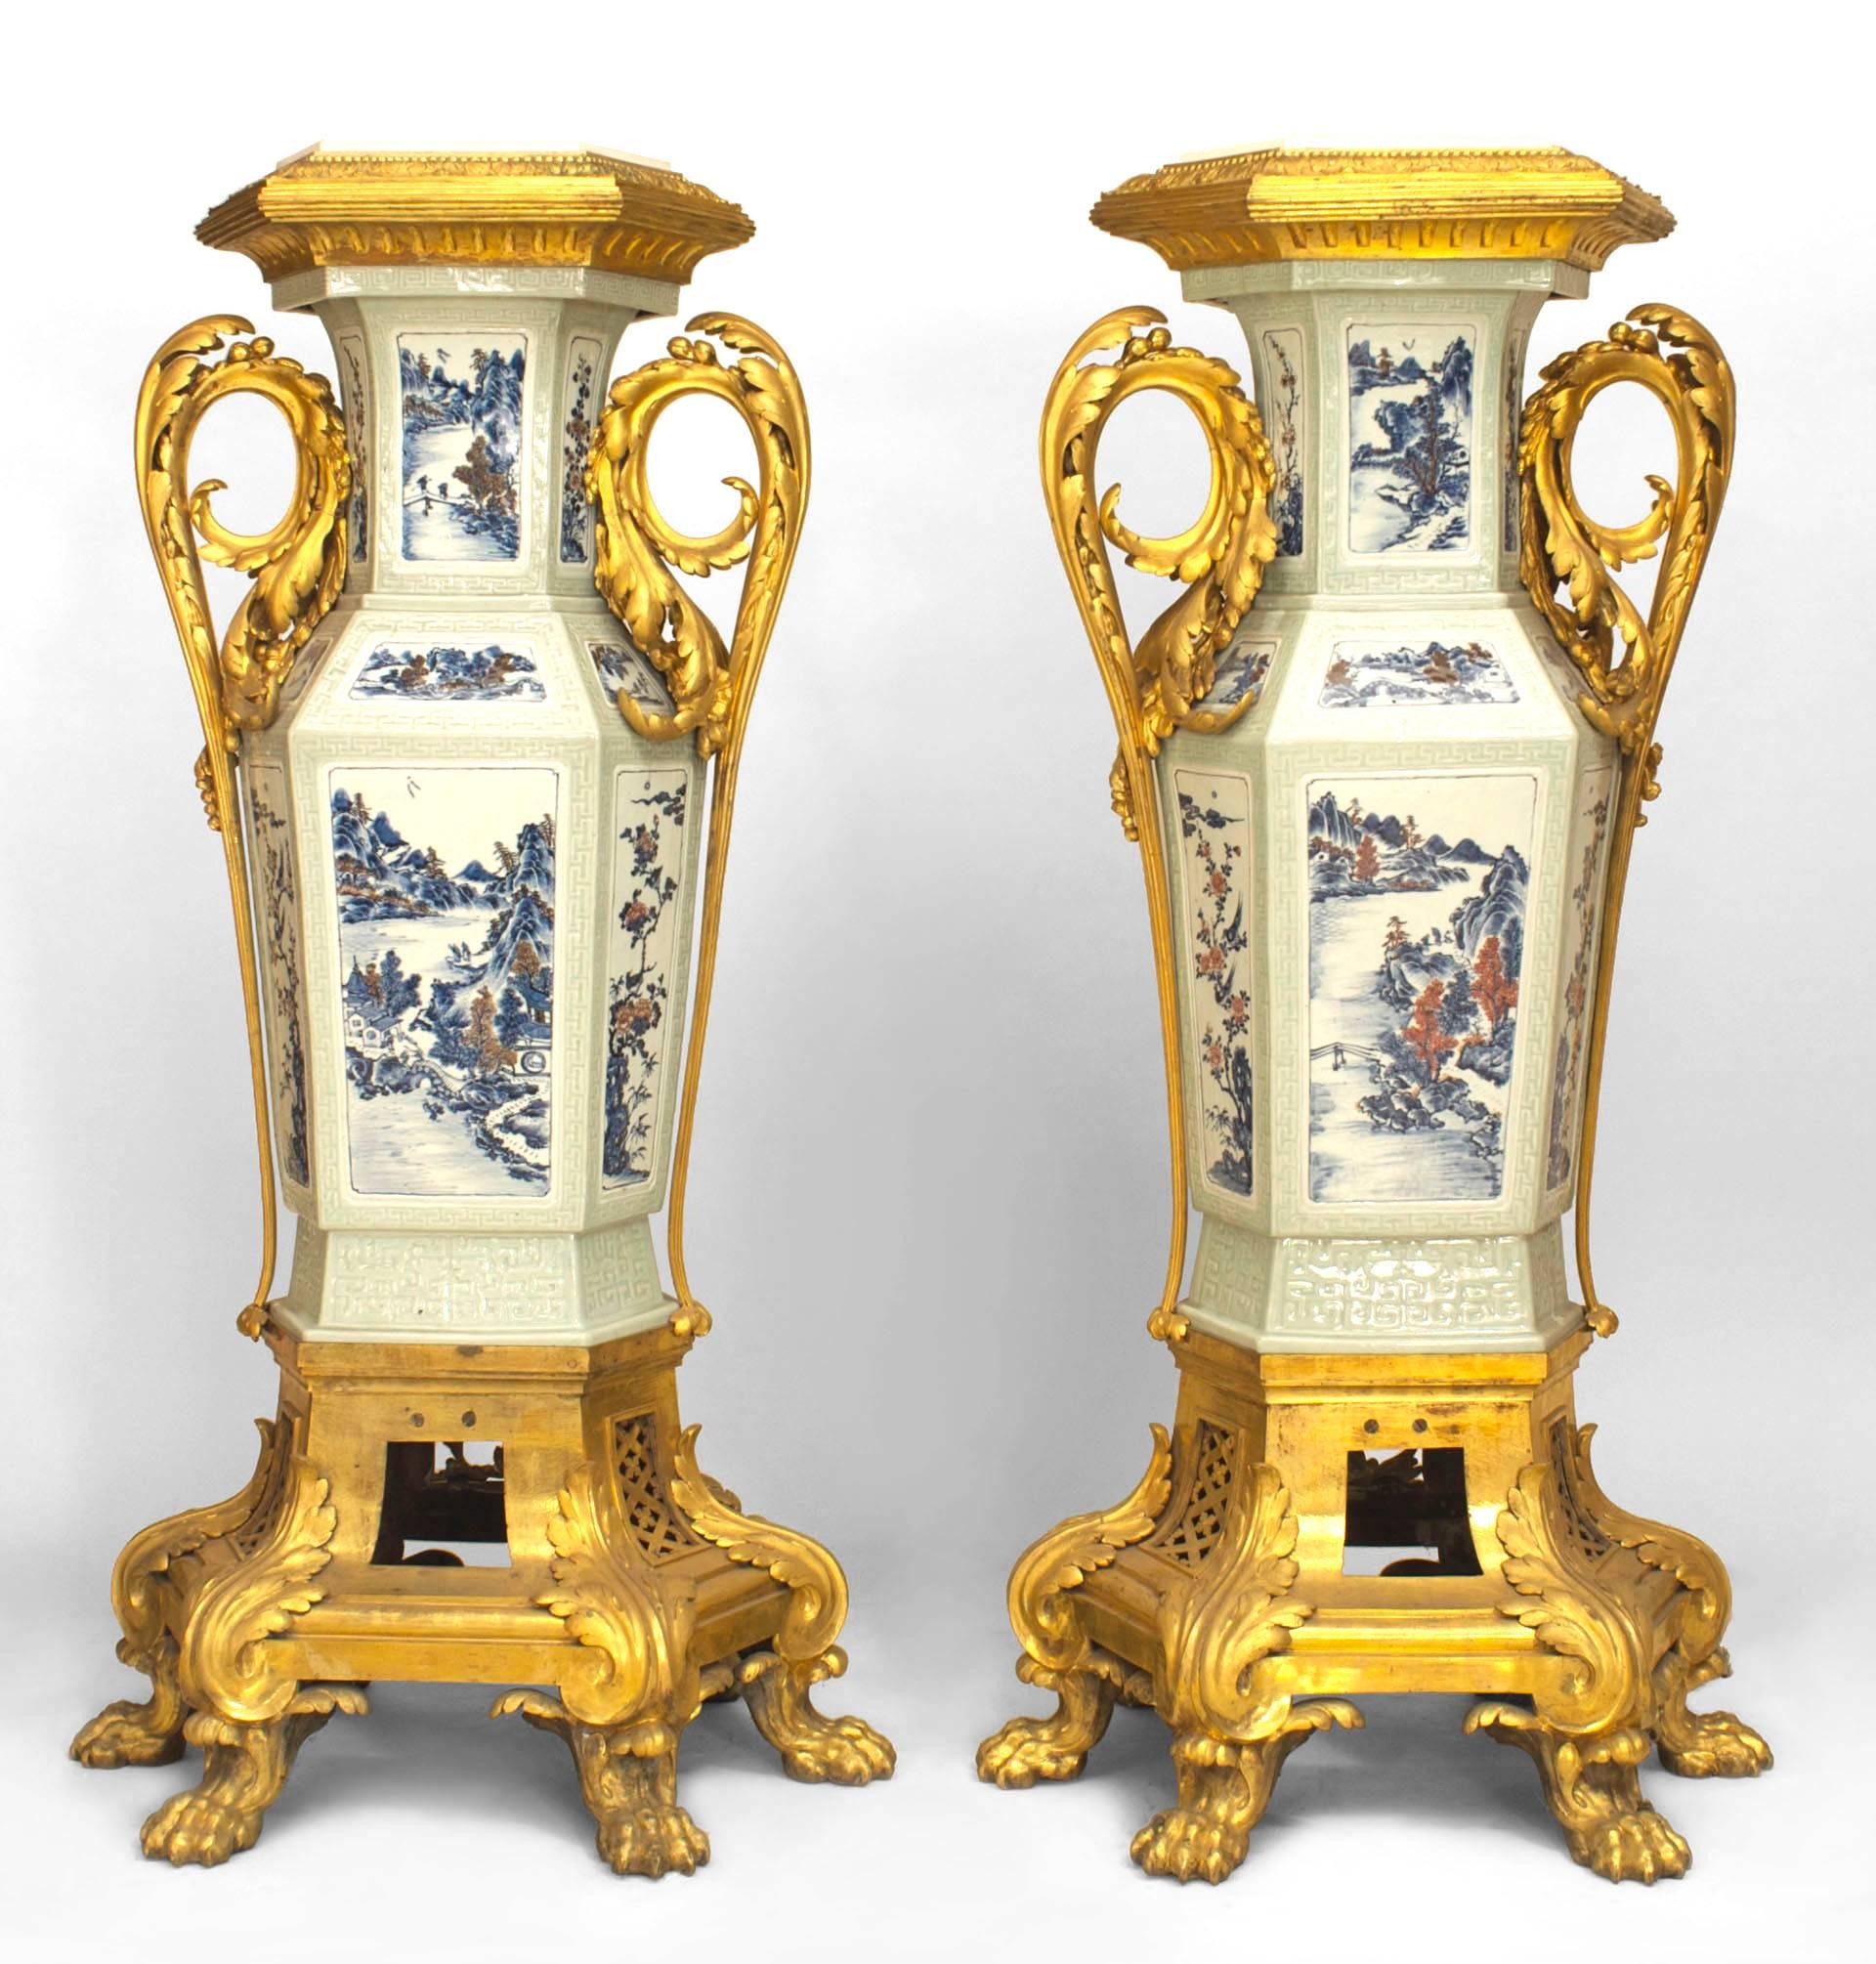 Pair of French Louis XV style (19th Cent) pedestals with Asian Chinese style celadon porcelain and bronze dore festoon trim and base with claw feet.
